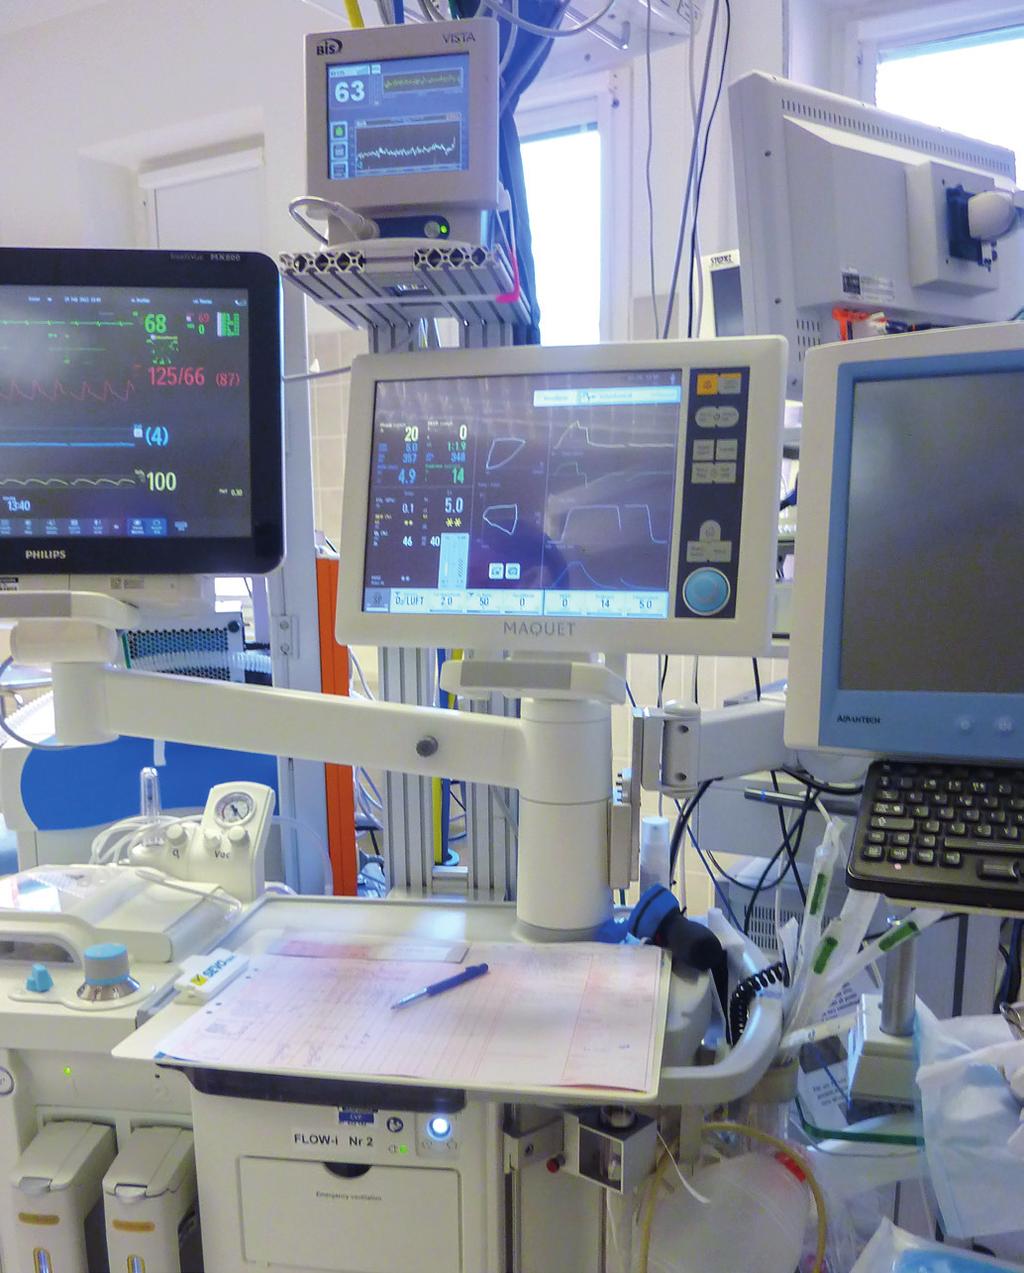 5 Meeting the high demands made on medical equipment During anesthesia, patients undergoing thoracic surgery are normally considered to belong to the high-risk category especially those who need lung